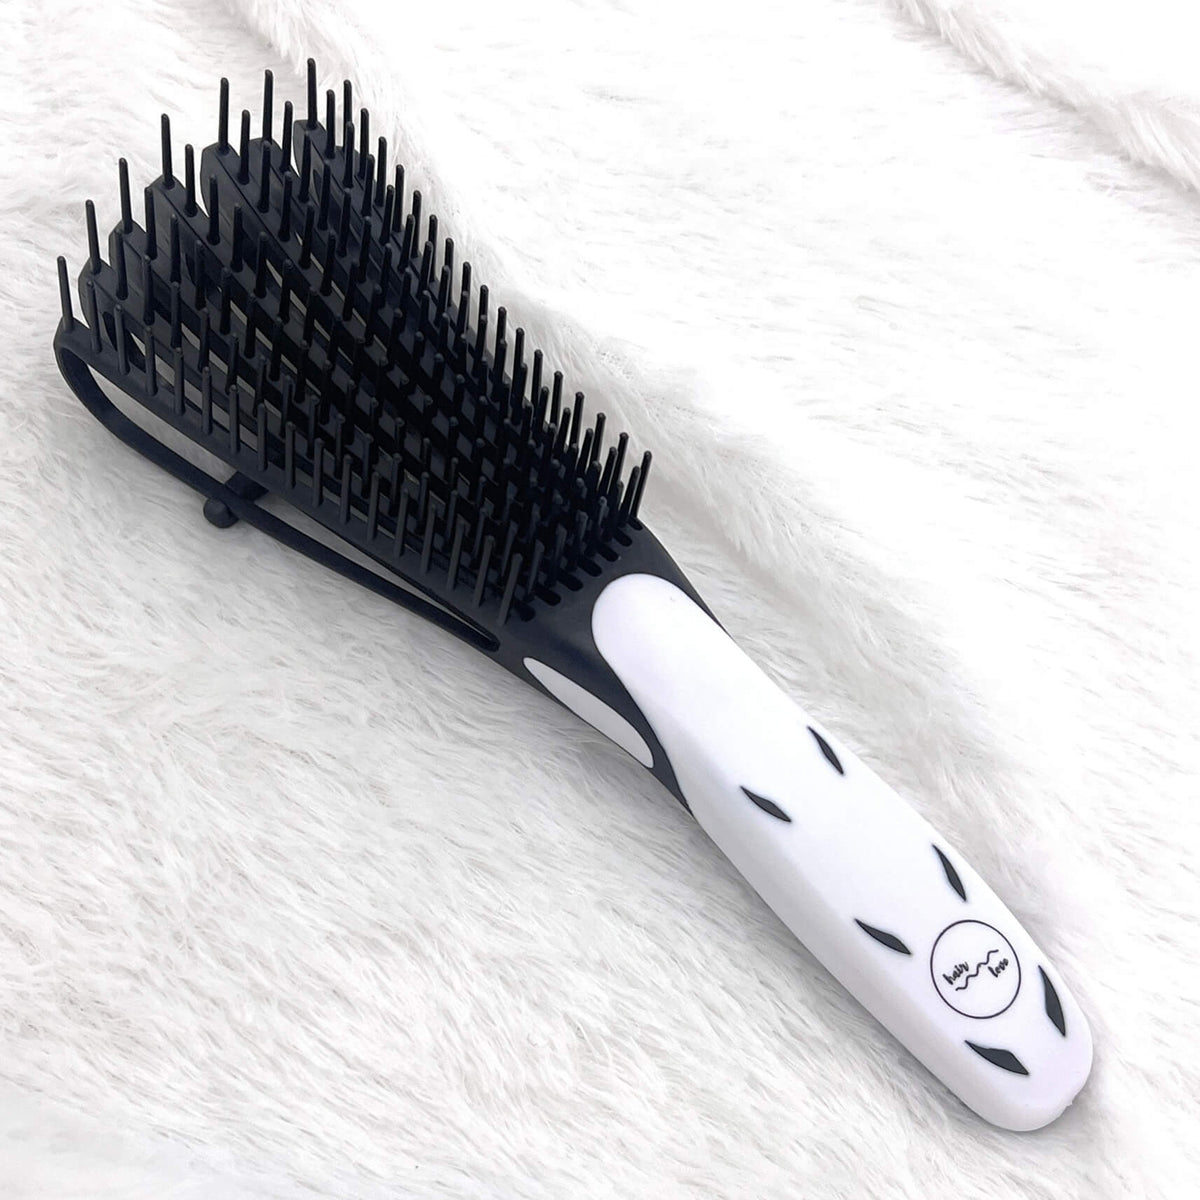 Detangling & Styling Brush for Curly, Wavy, Kinky Hair Hair Love India